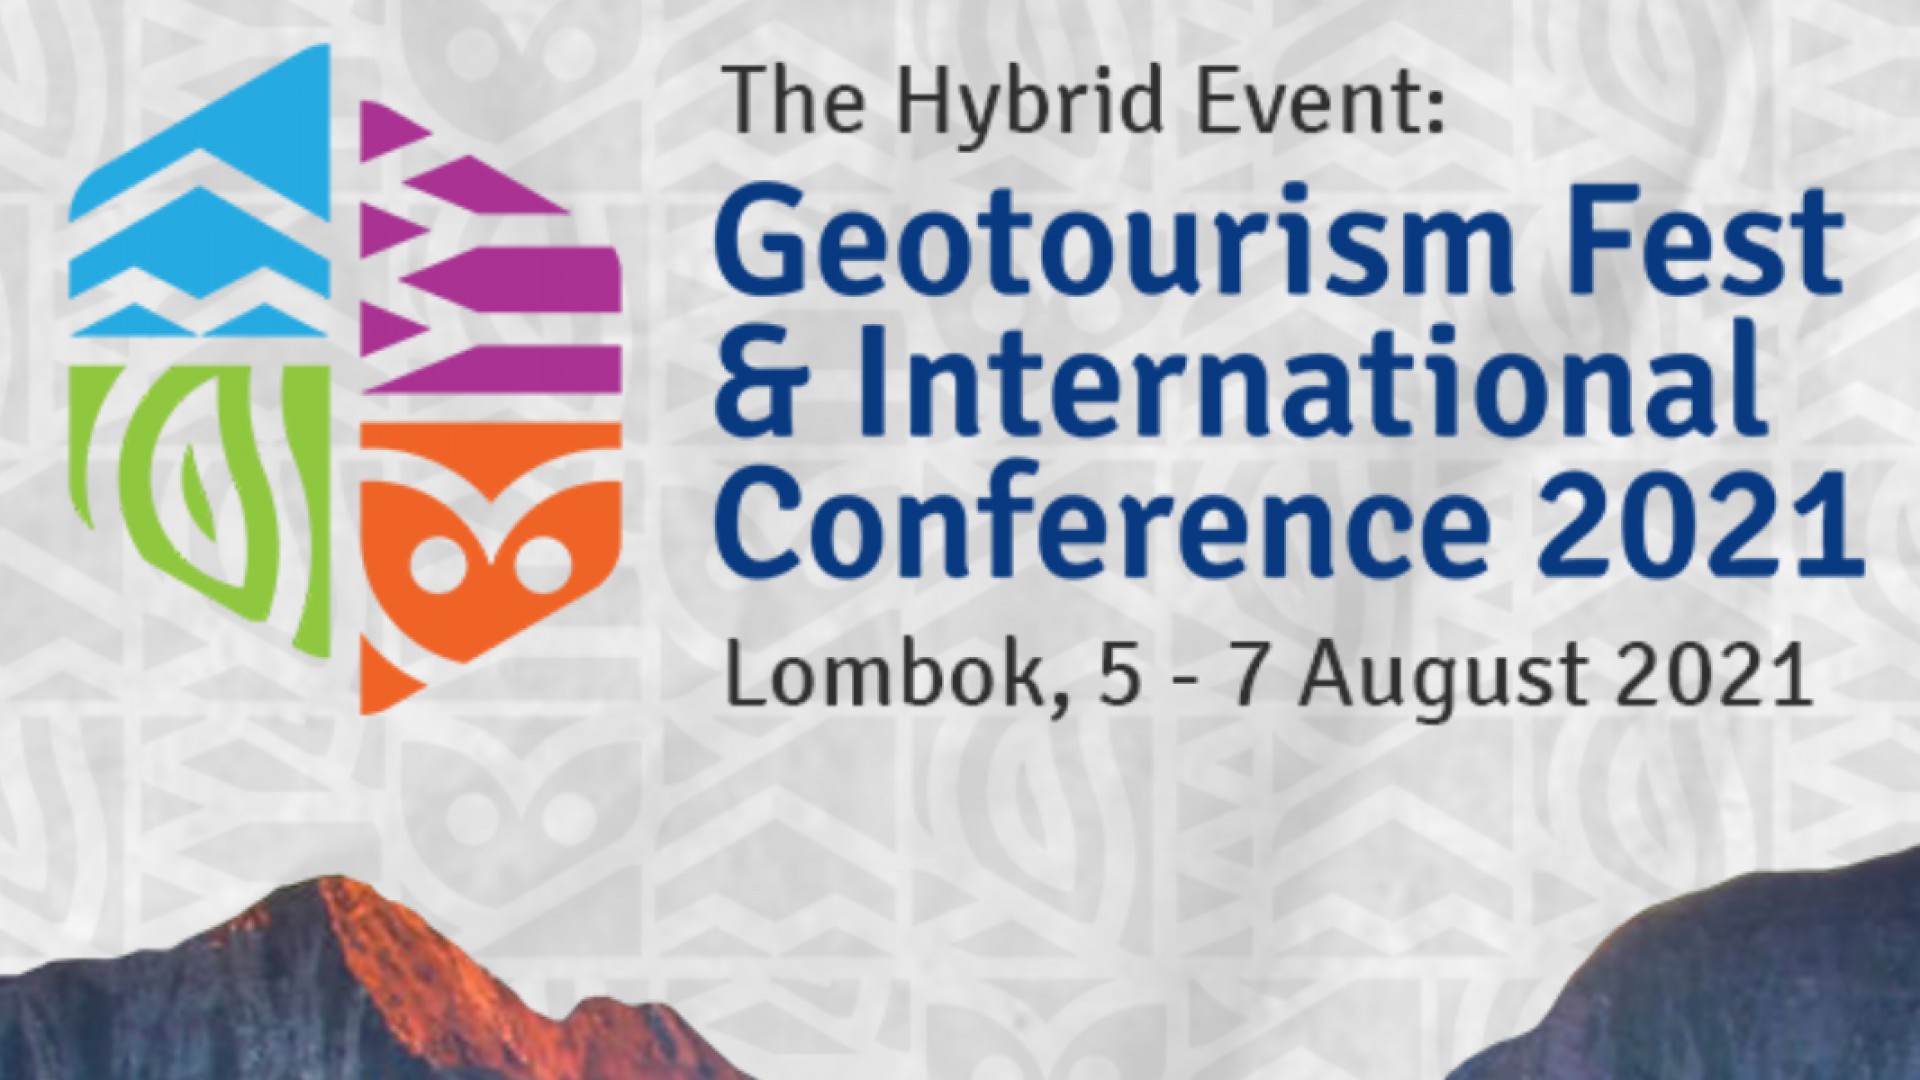 Geotourism Fest and International Conference 2021